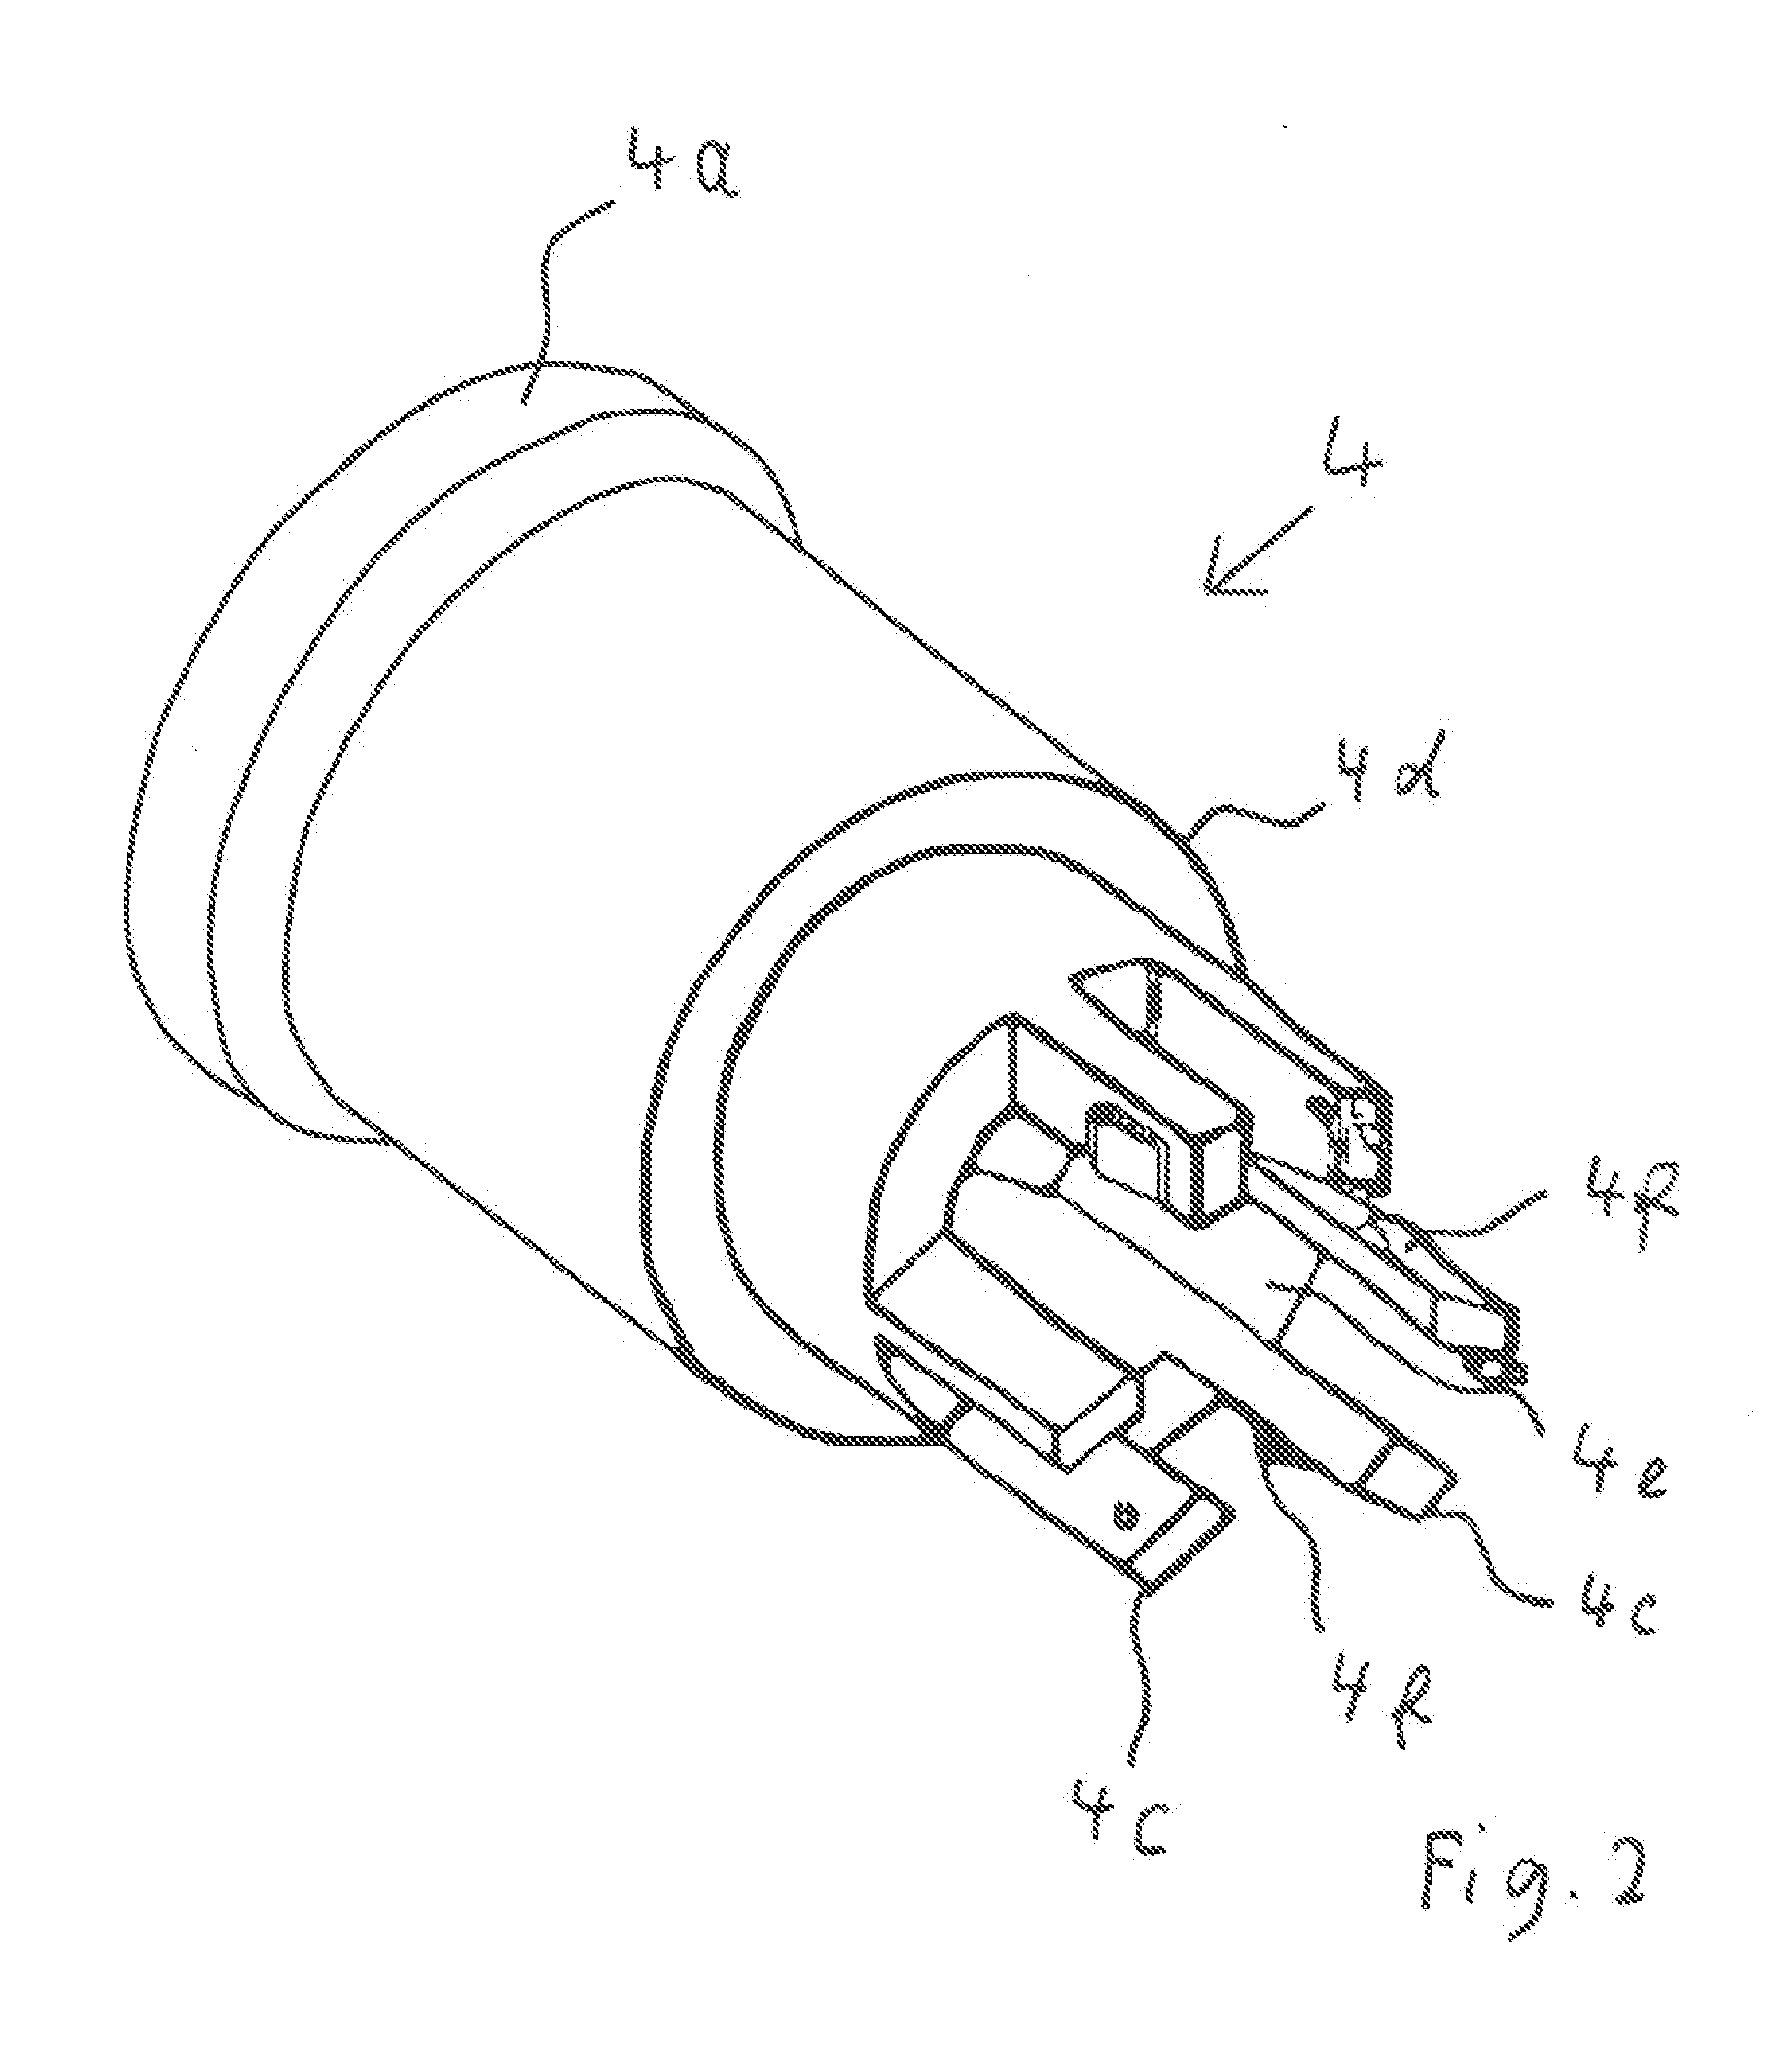 Actuator device for the seat adjustment in a motor vehicle